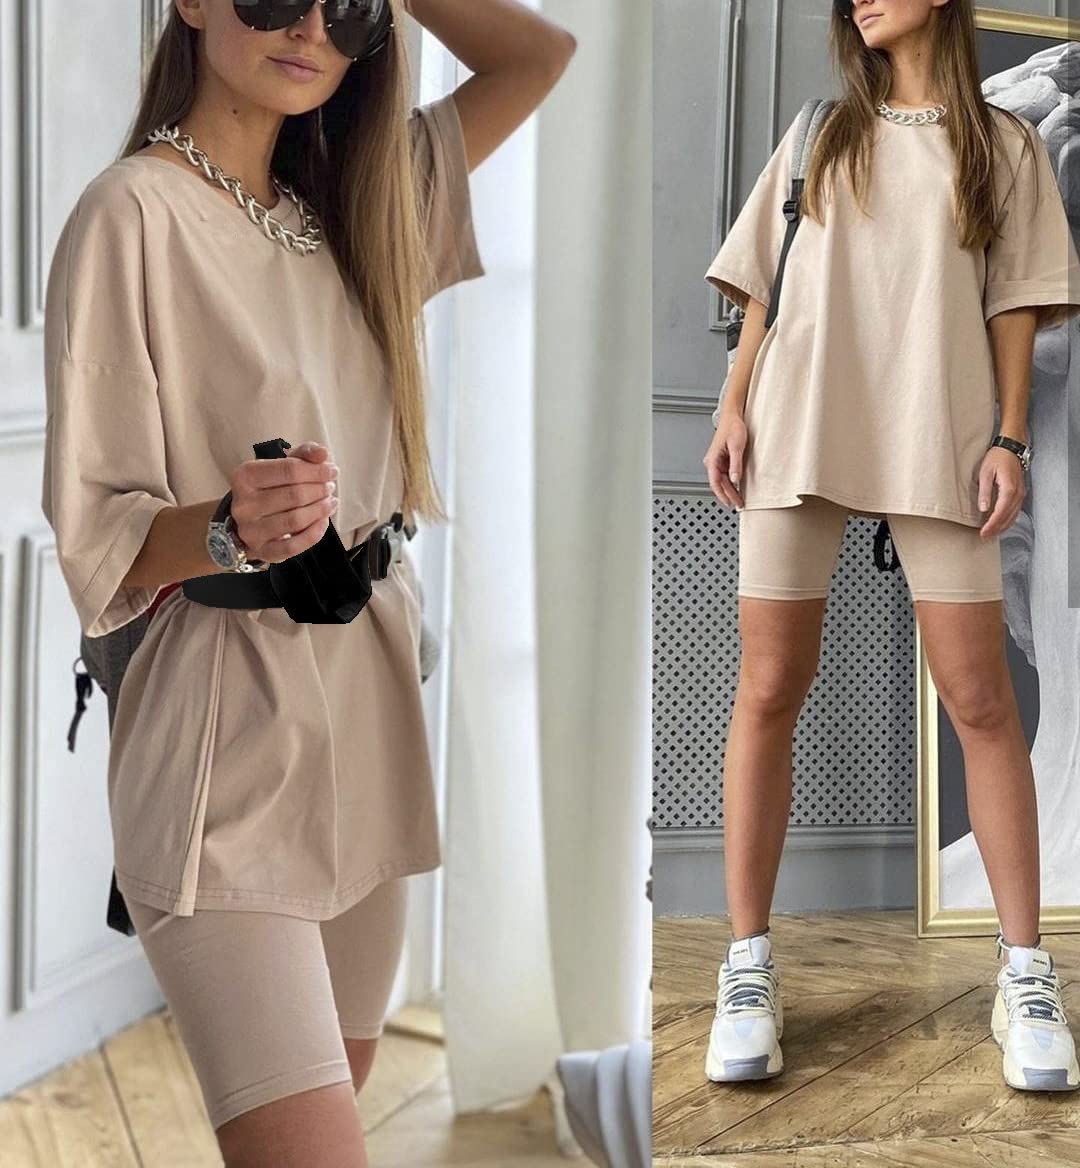 Glamaker Women 2 Piece Outfit sets Casual Oversized T-Shirt Tops Biker Shorts Workout Sports Tracksuit